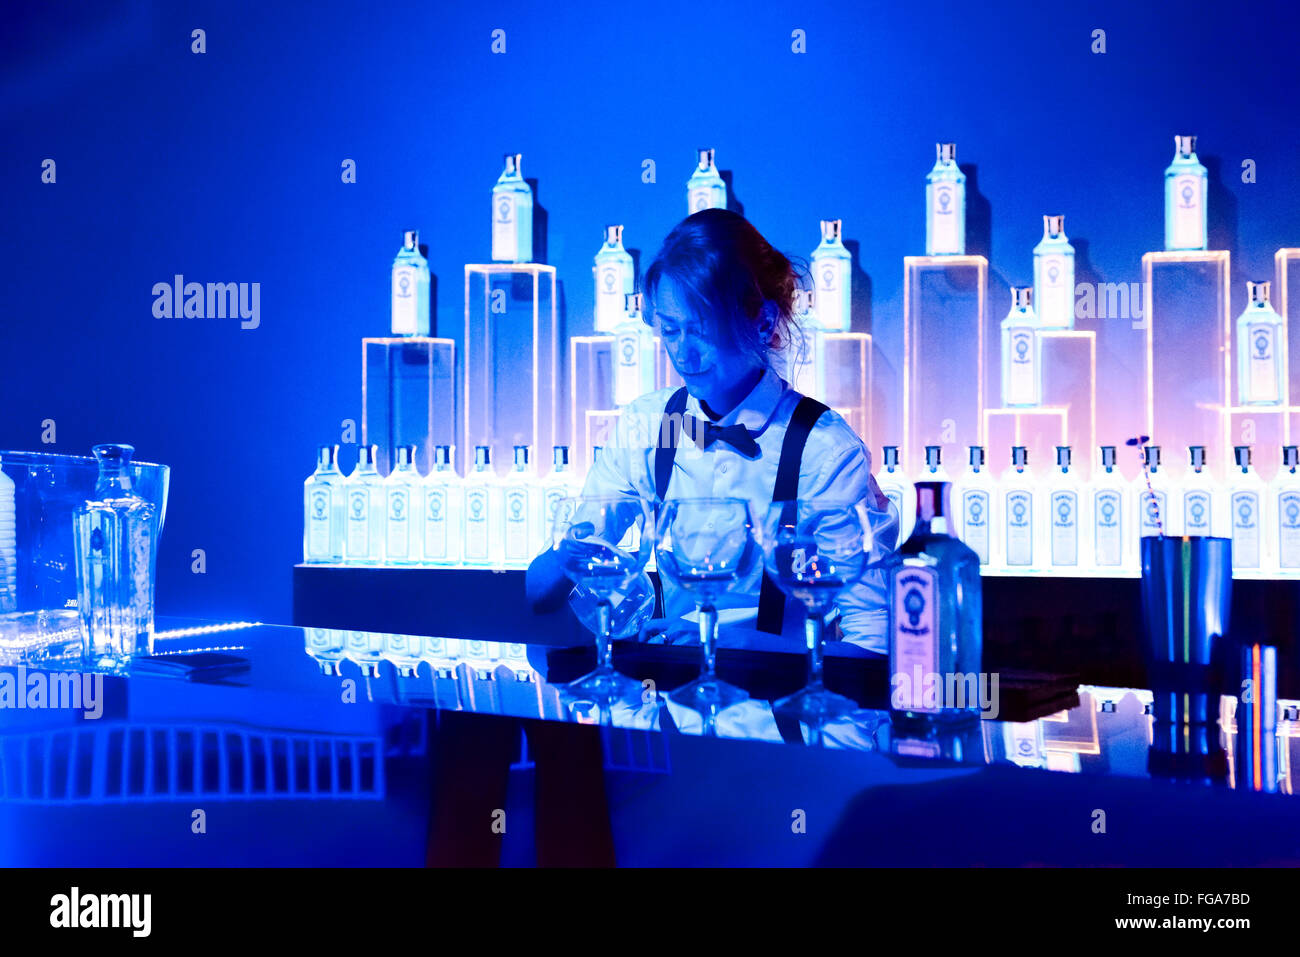 18th February 2016 Madrid, Spain. A female bar tender preparing drinks in the #TheatreRoom. The Bombay Sapphire have designed the MBFW 2016 Madrid kissing room with a spacious blue themed mirror surround hall, #TheatreRoom,  and The Art Room, with large LED screen that reflects the movements of people using Wii type technology at MBFW 2016 Madrid, Spain. © Lawrence JC Baron/Alamy Live News. Stock Photo